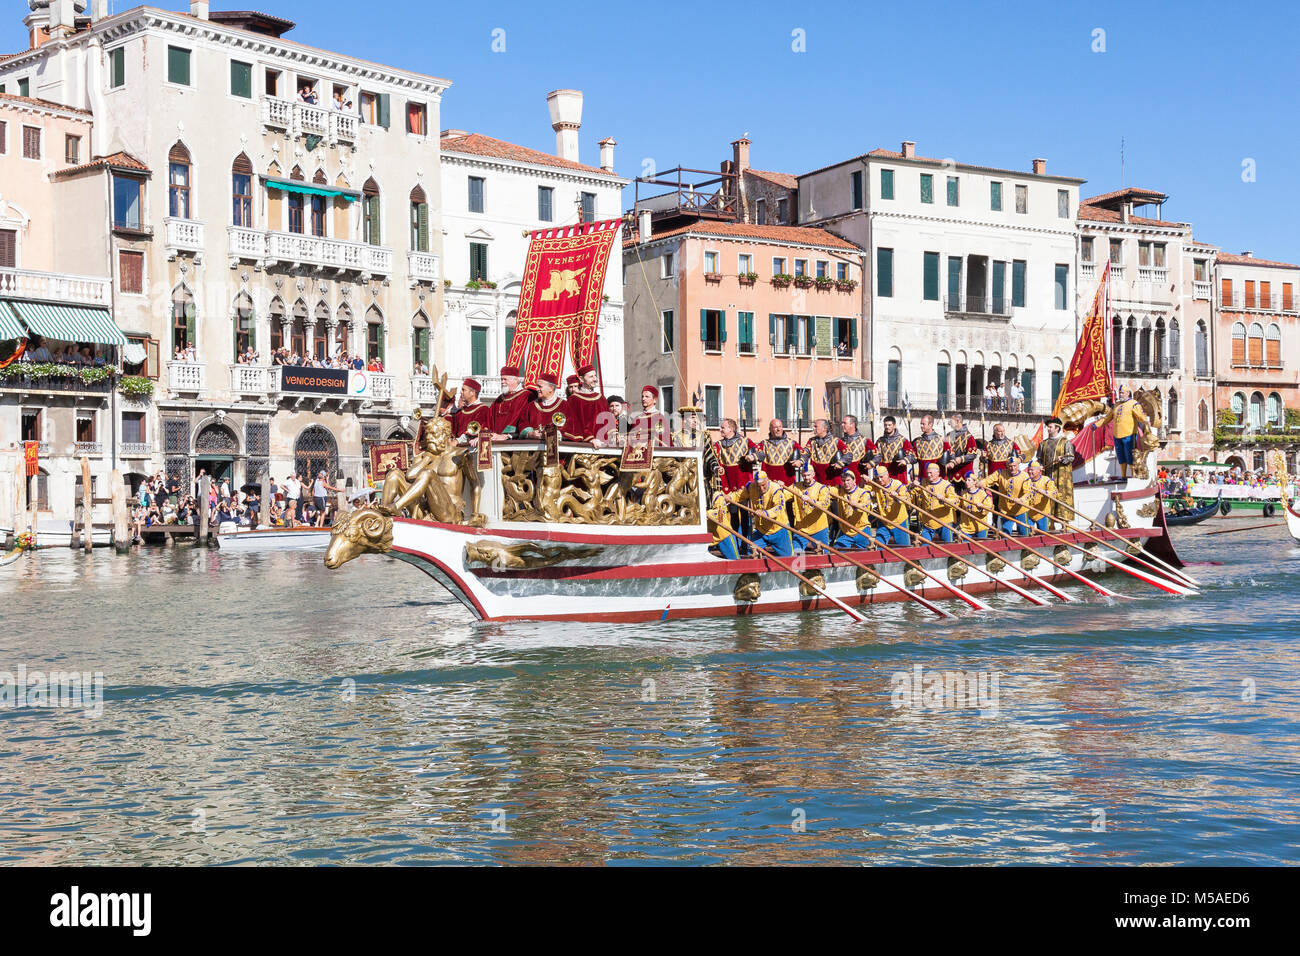 La Serenissima, the historical Bucintoro boat carrying the Doges during the  Regata Storica, Venice, Veneto, Italy  on the Grand Canal in Cannaregio Stock Photo